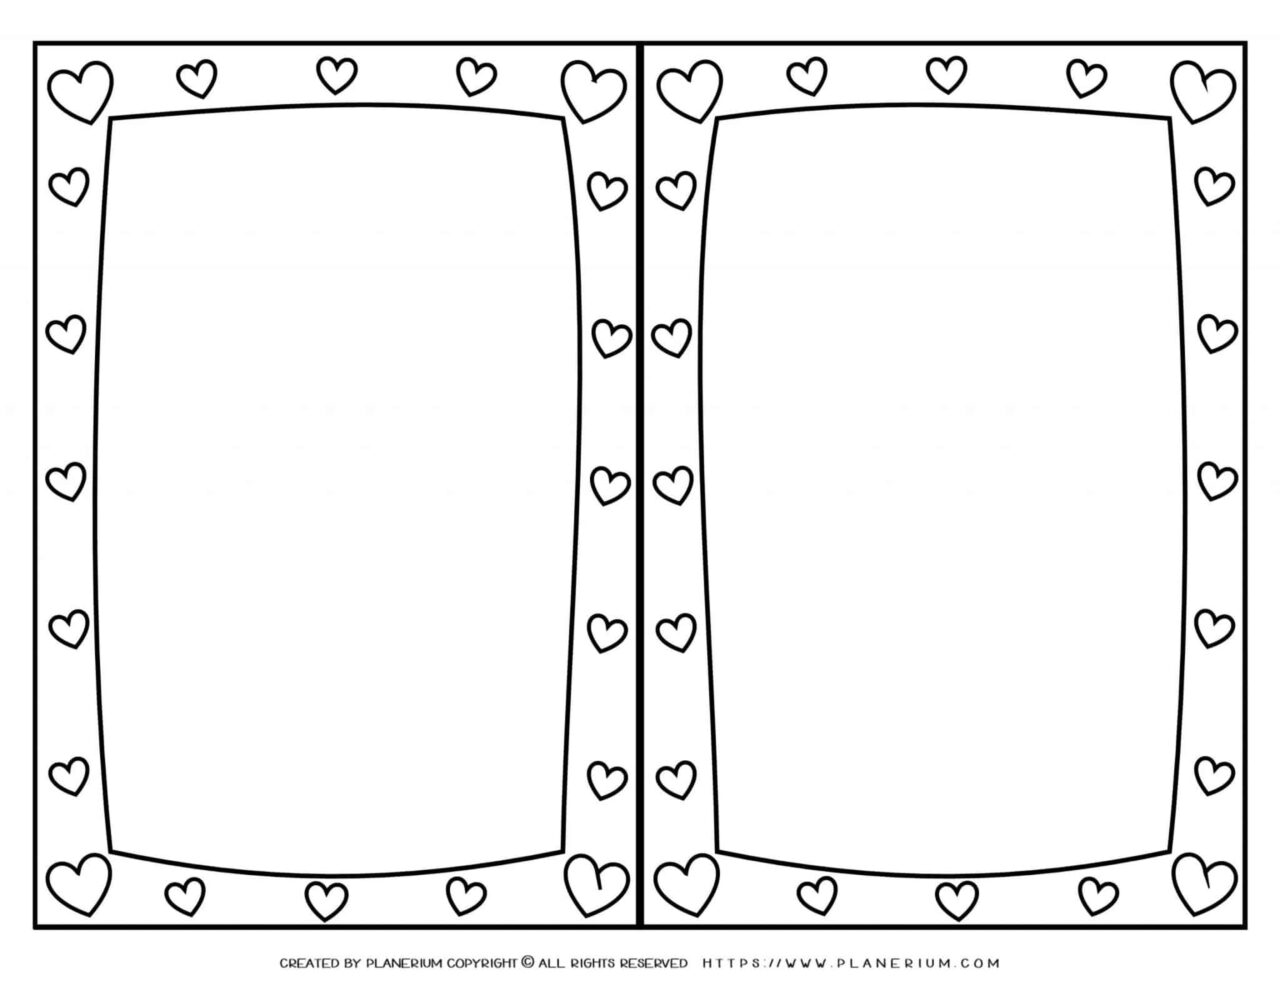 Mother's Day Coloring Page with Greeting Frame of Hearts